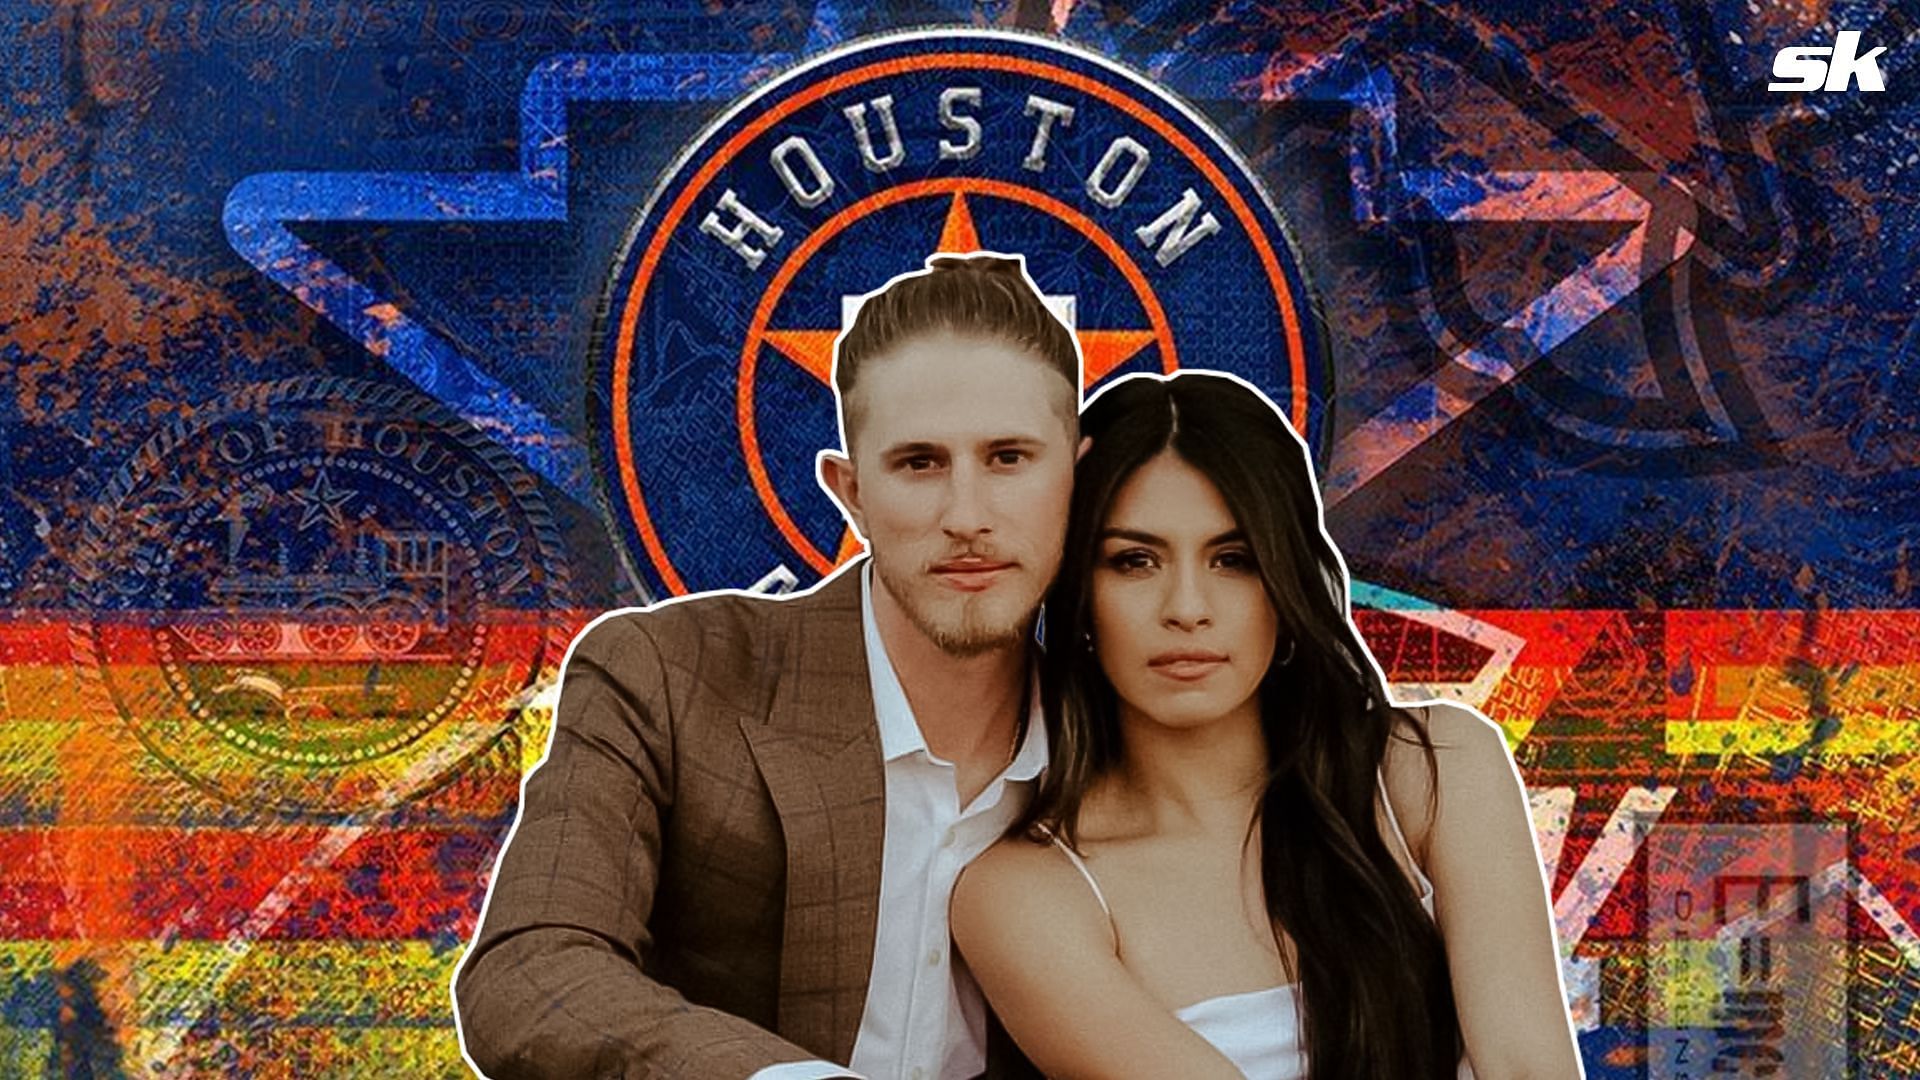 &ldquo;We&rsquo;re coming home!&rdquo; - Josh Hader&rsquo;s wife Maria beams with pride after her husband makes Houston Astros comeback with a $95 million deal